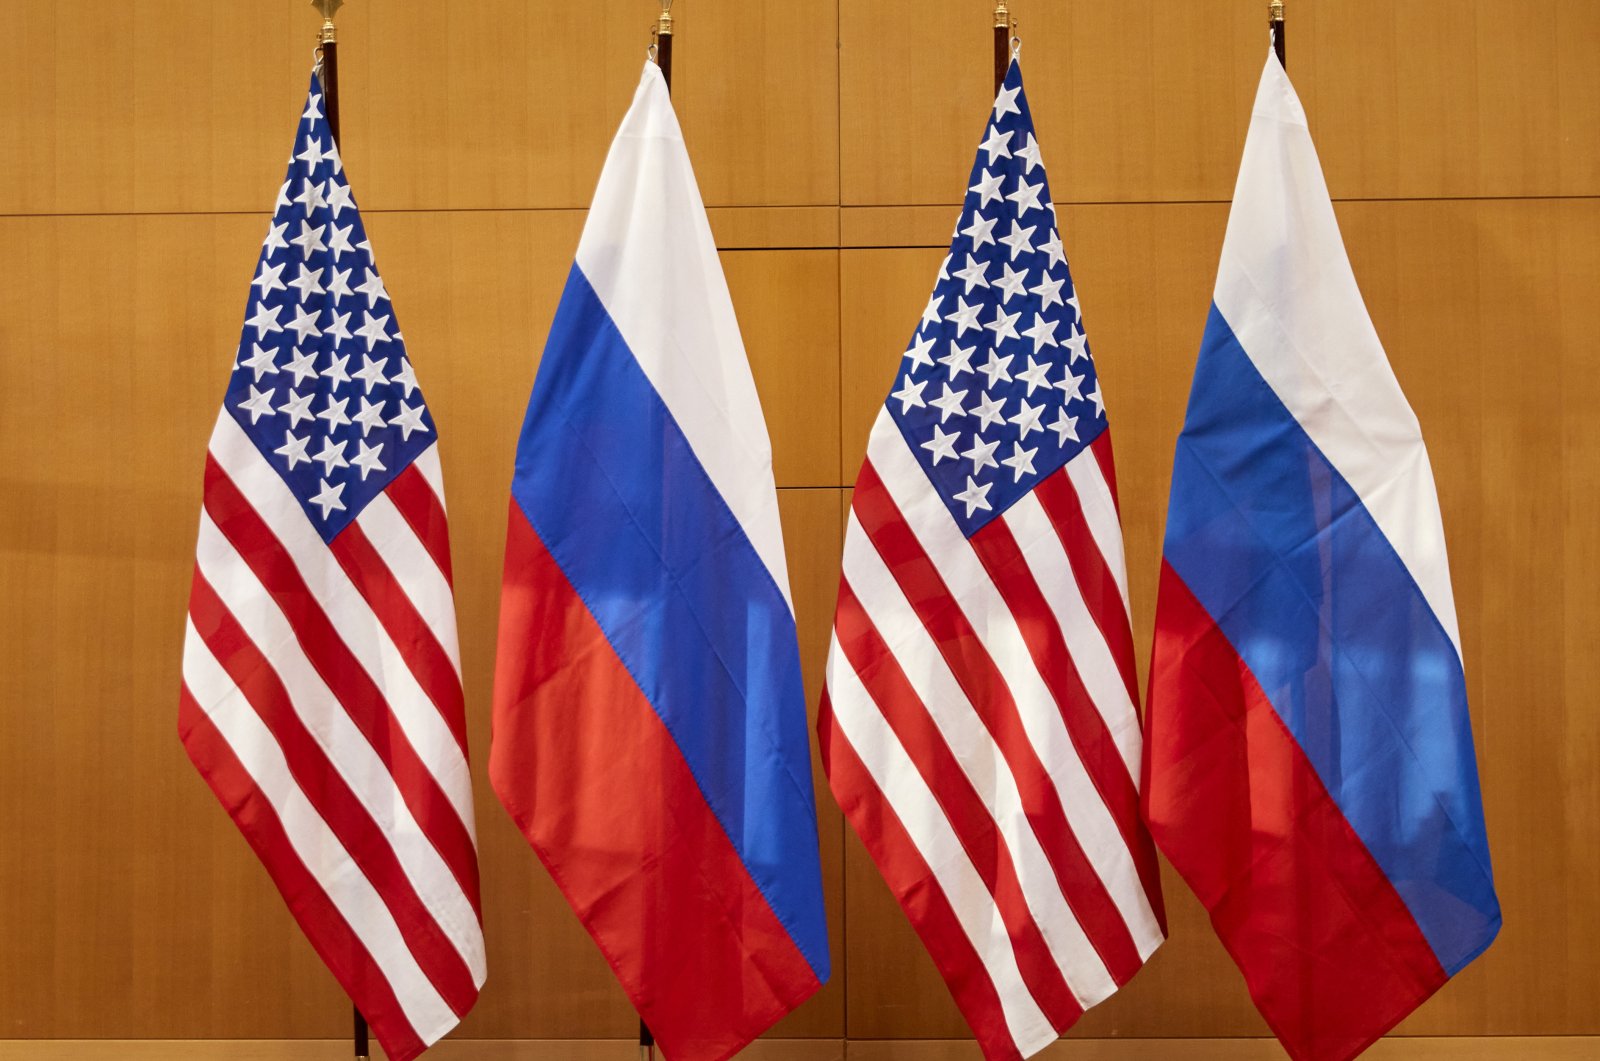 Russian and American flags displayed at the United States Mission prior to talks between deputy foreign minister Sergei Ryabkov and U.S. Deputy Secretary of State Wendy Sherman in Geneva, Switzerland, on Monday, Jan. 10, 2022. (AP File Photo)